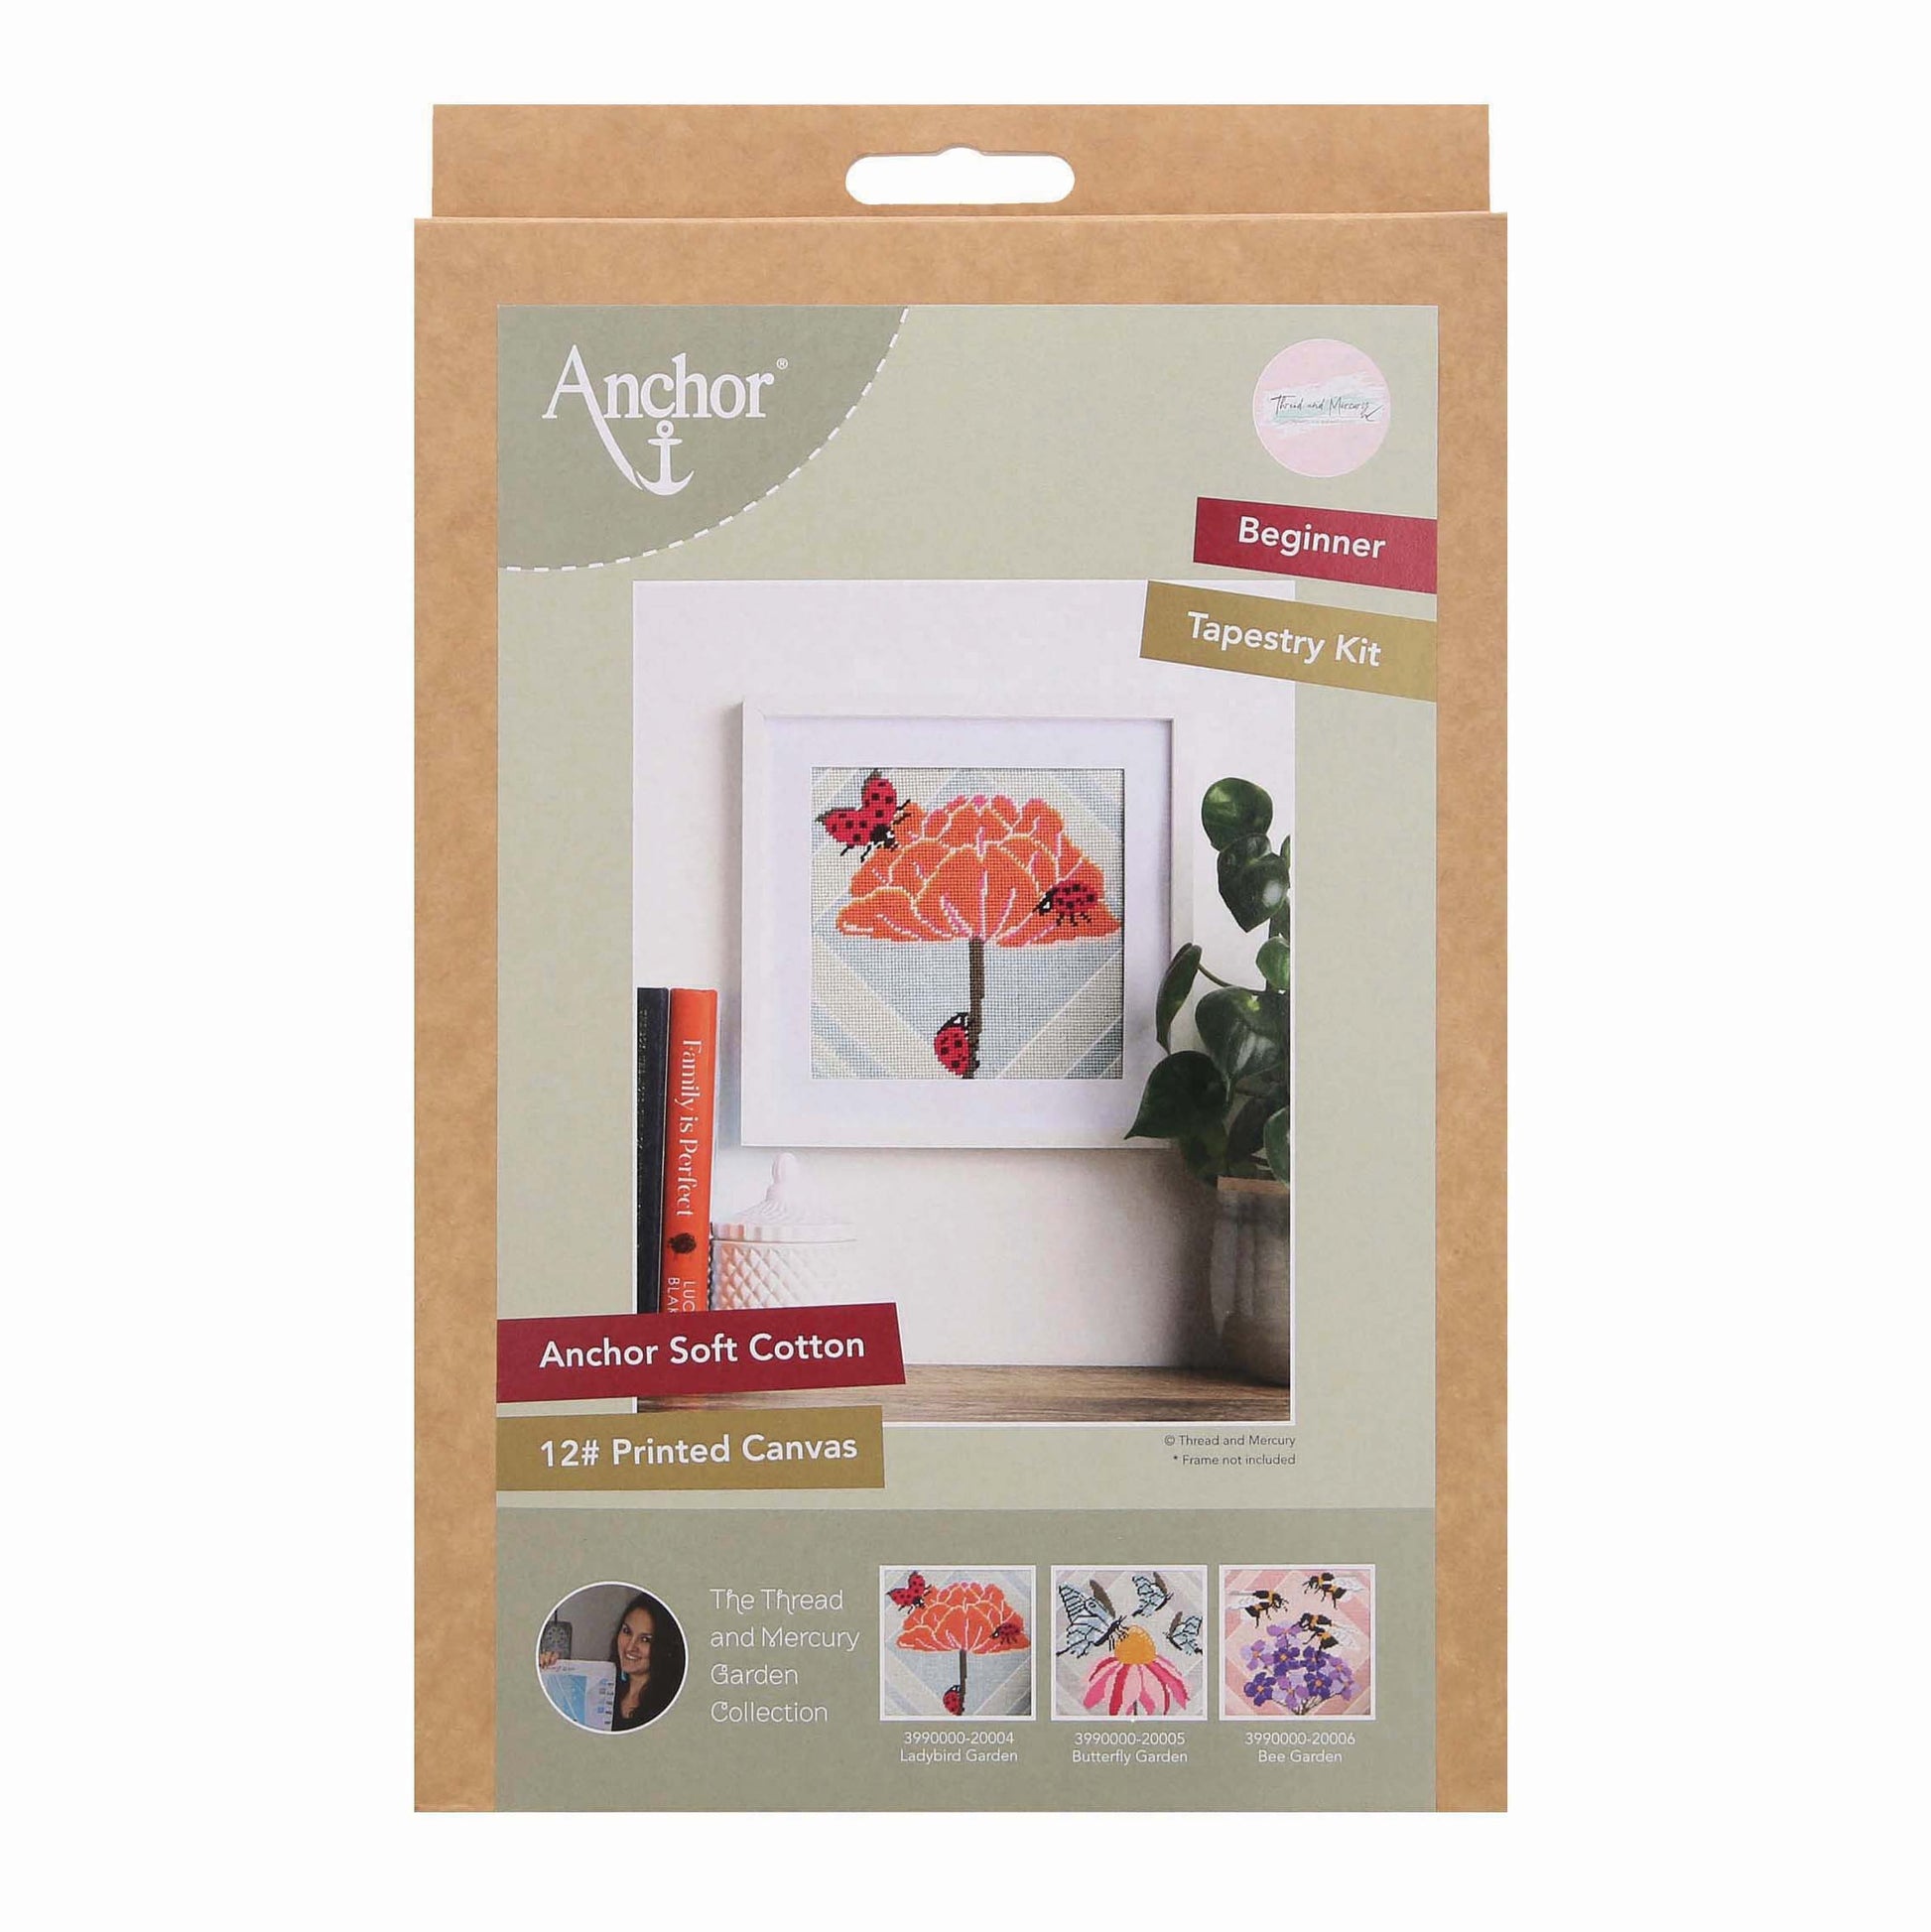 part of the anchor garden collection this beginner tapestry kit is beautifully packaged in a box and sits alongside the butterfly tapestry and the bees tapestry